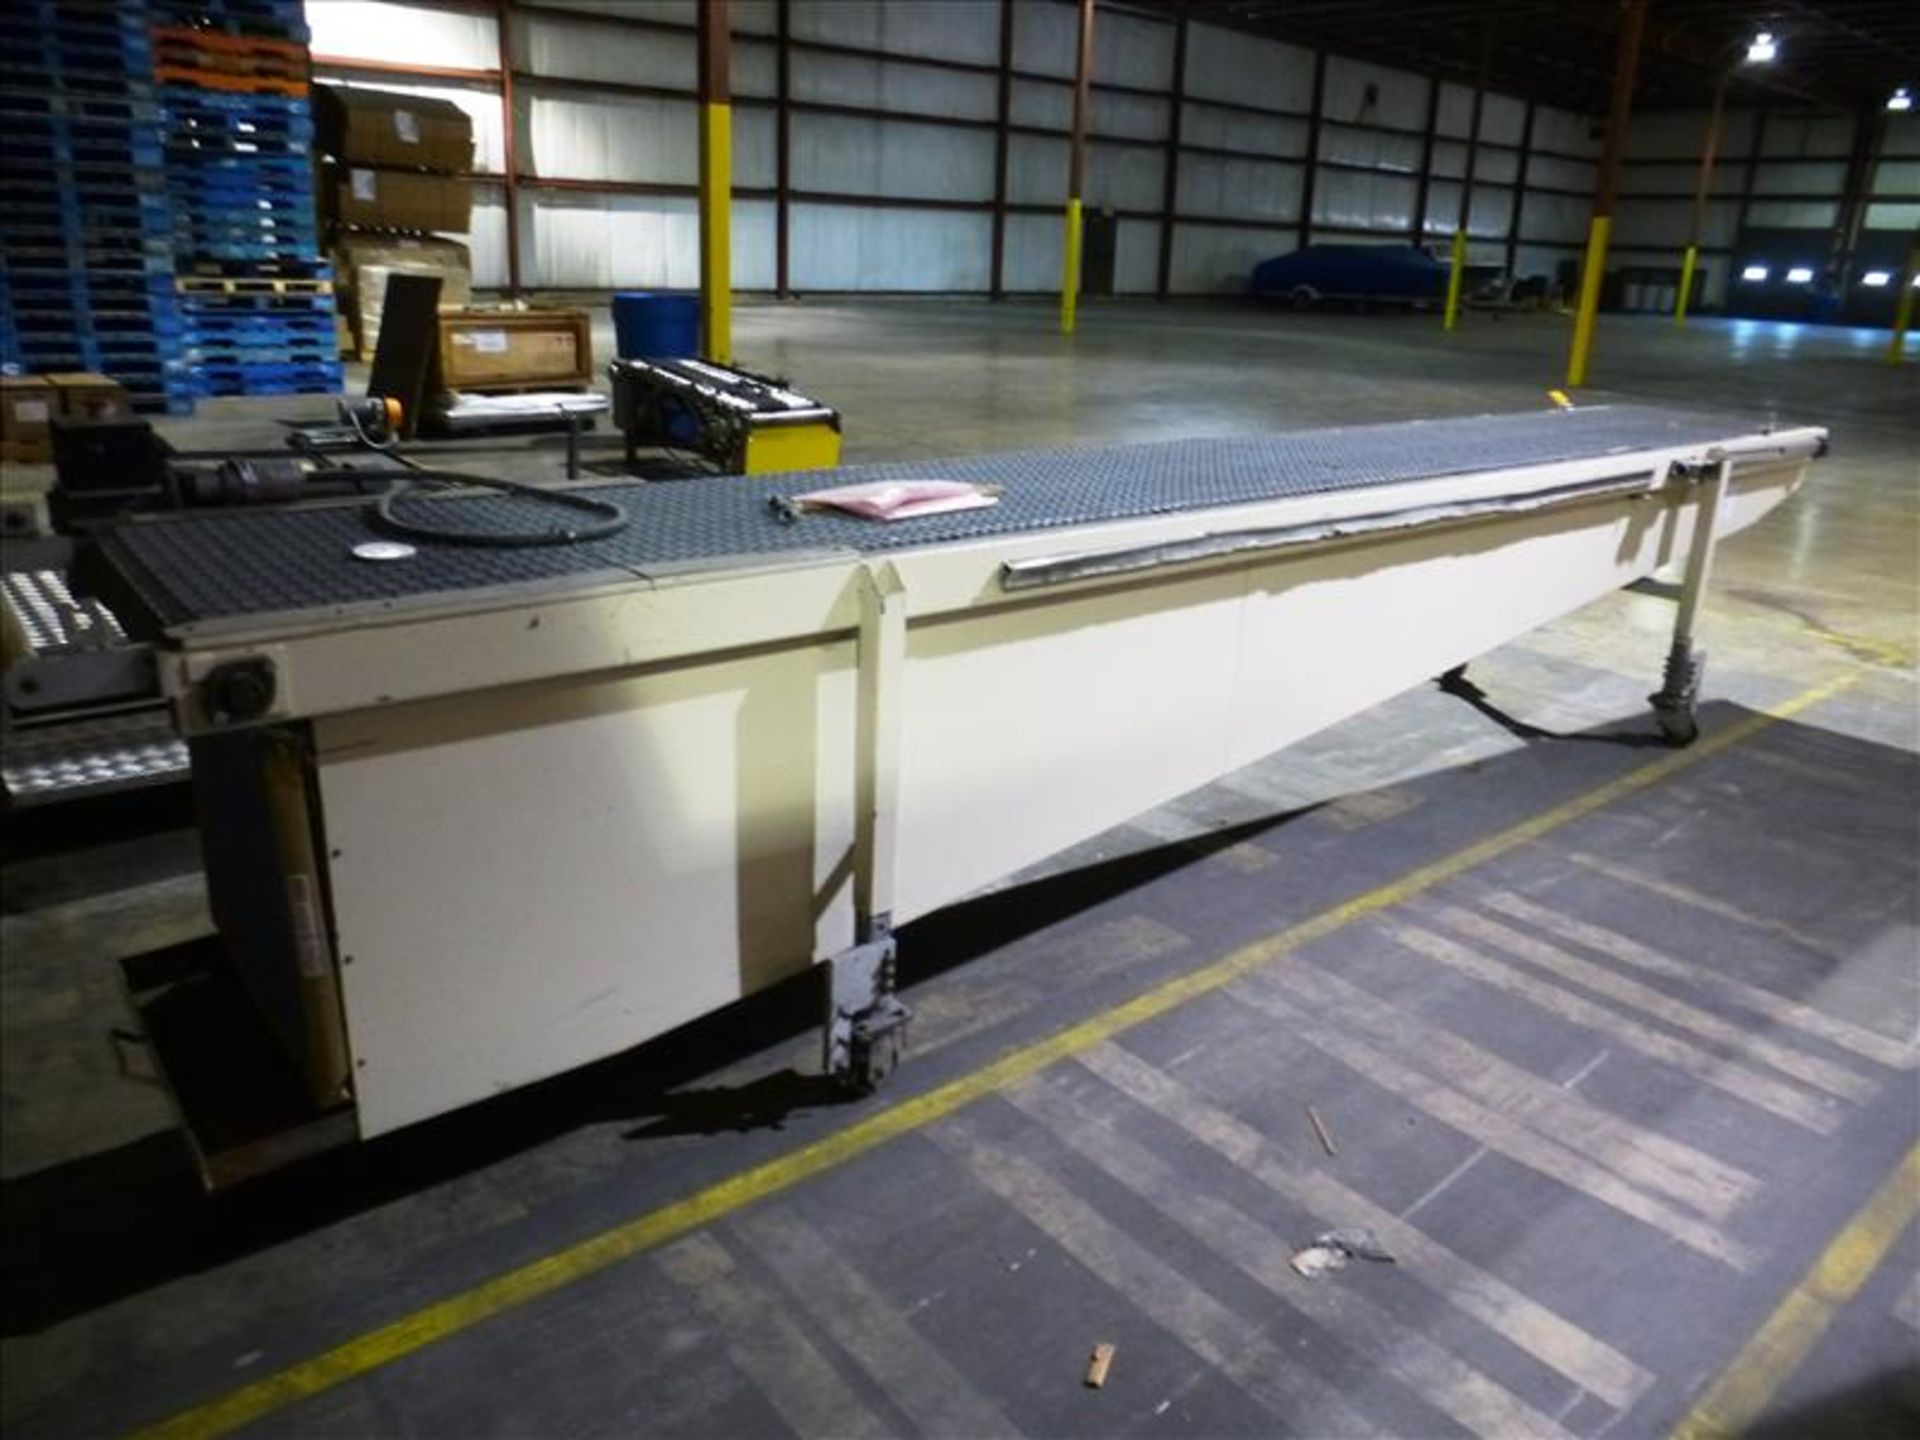 variable speed chain belt conveyor on casters, approx. 15' long x 2' wide c/w Leeson variable - Image 3 of 3